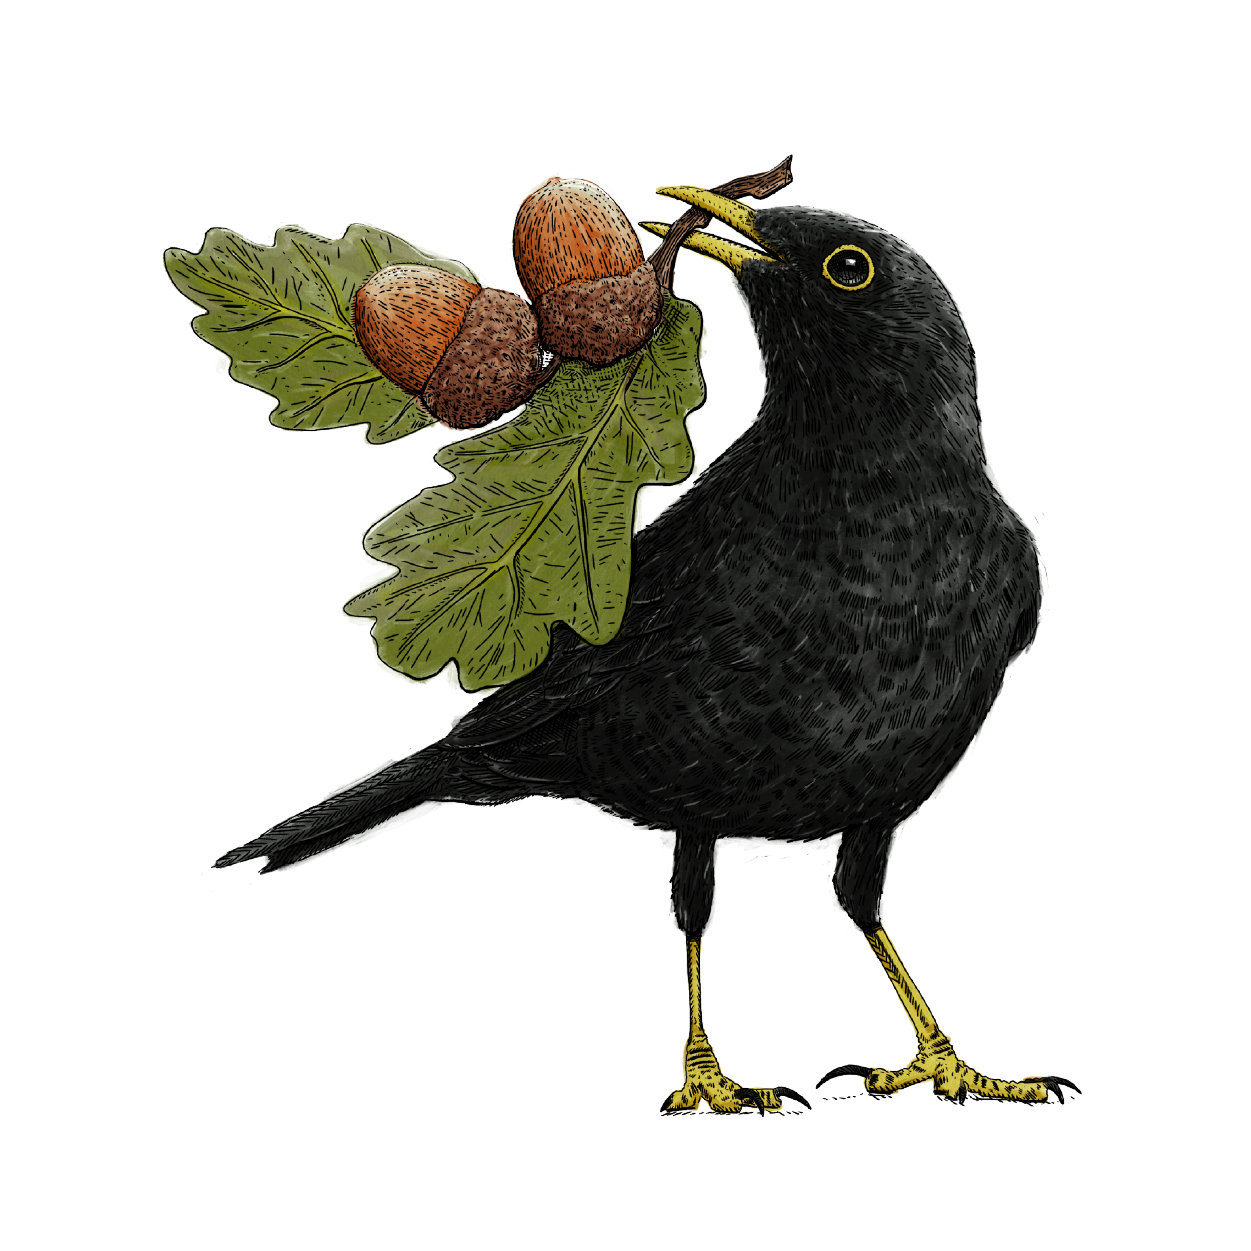 Black bird with acorns in its mouth